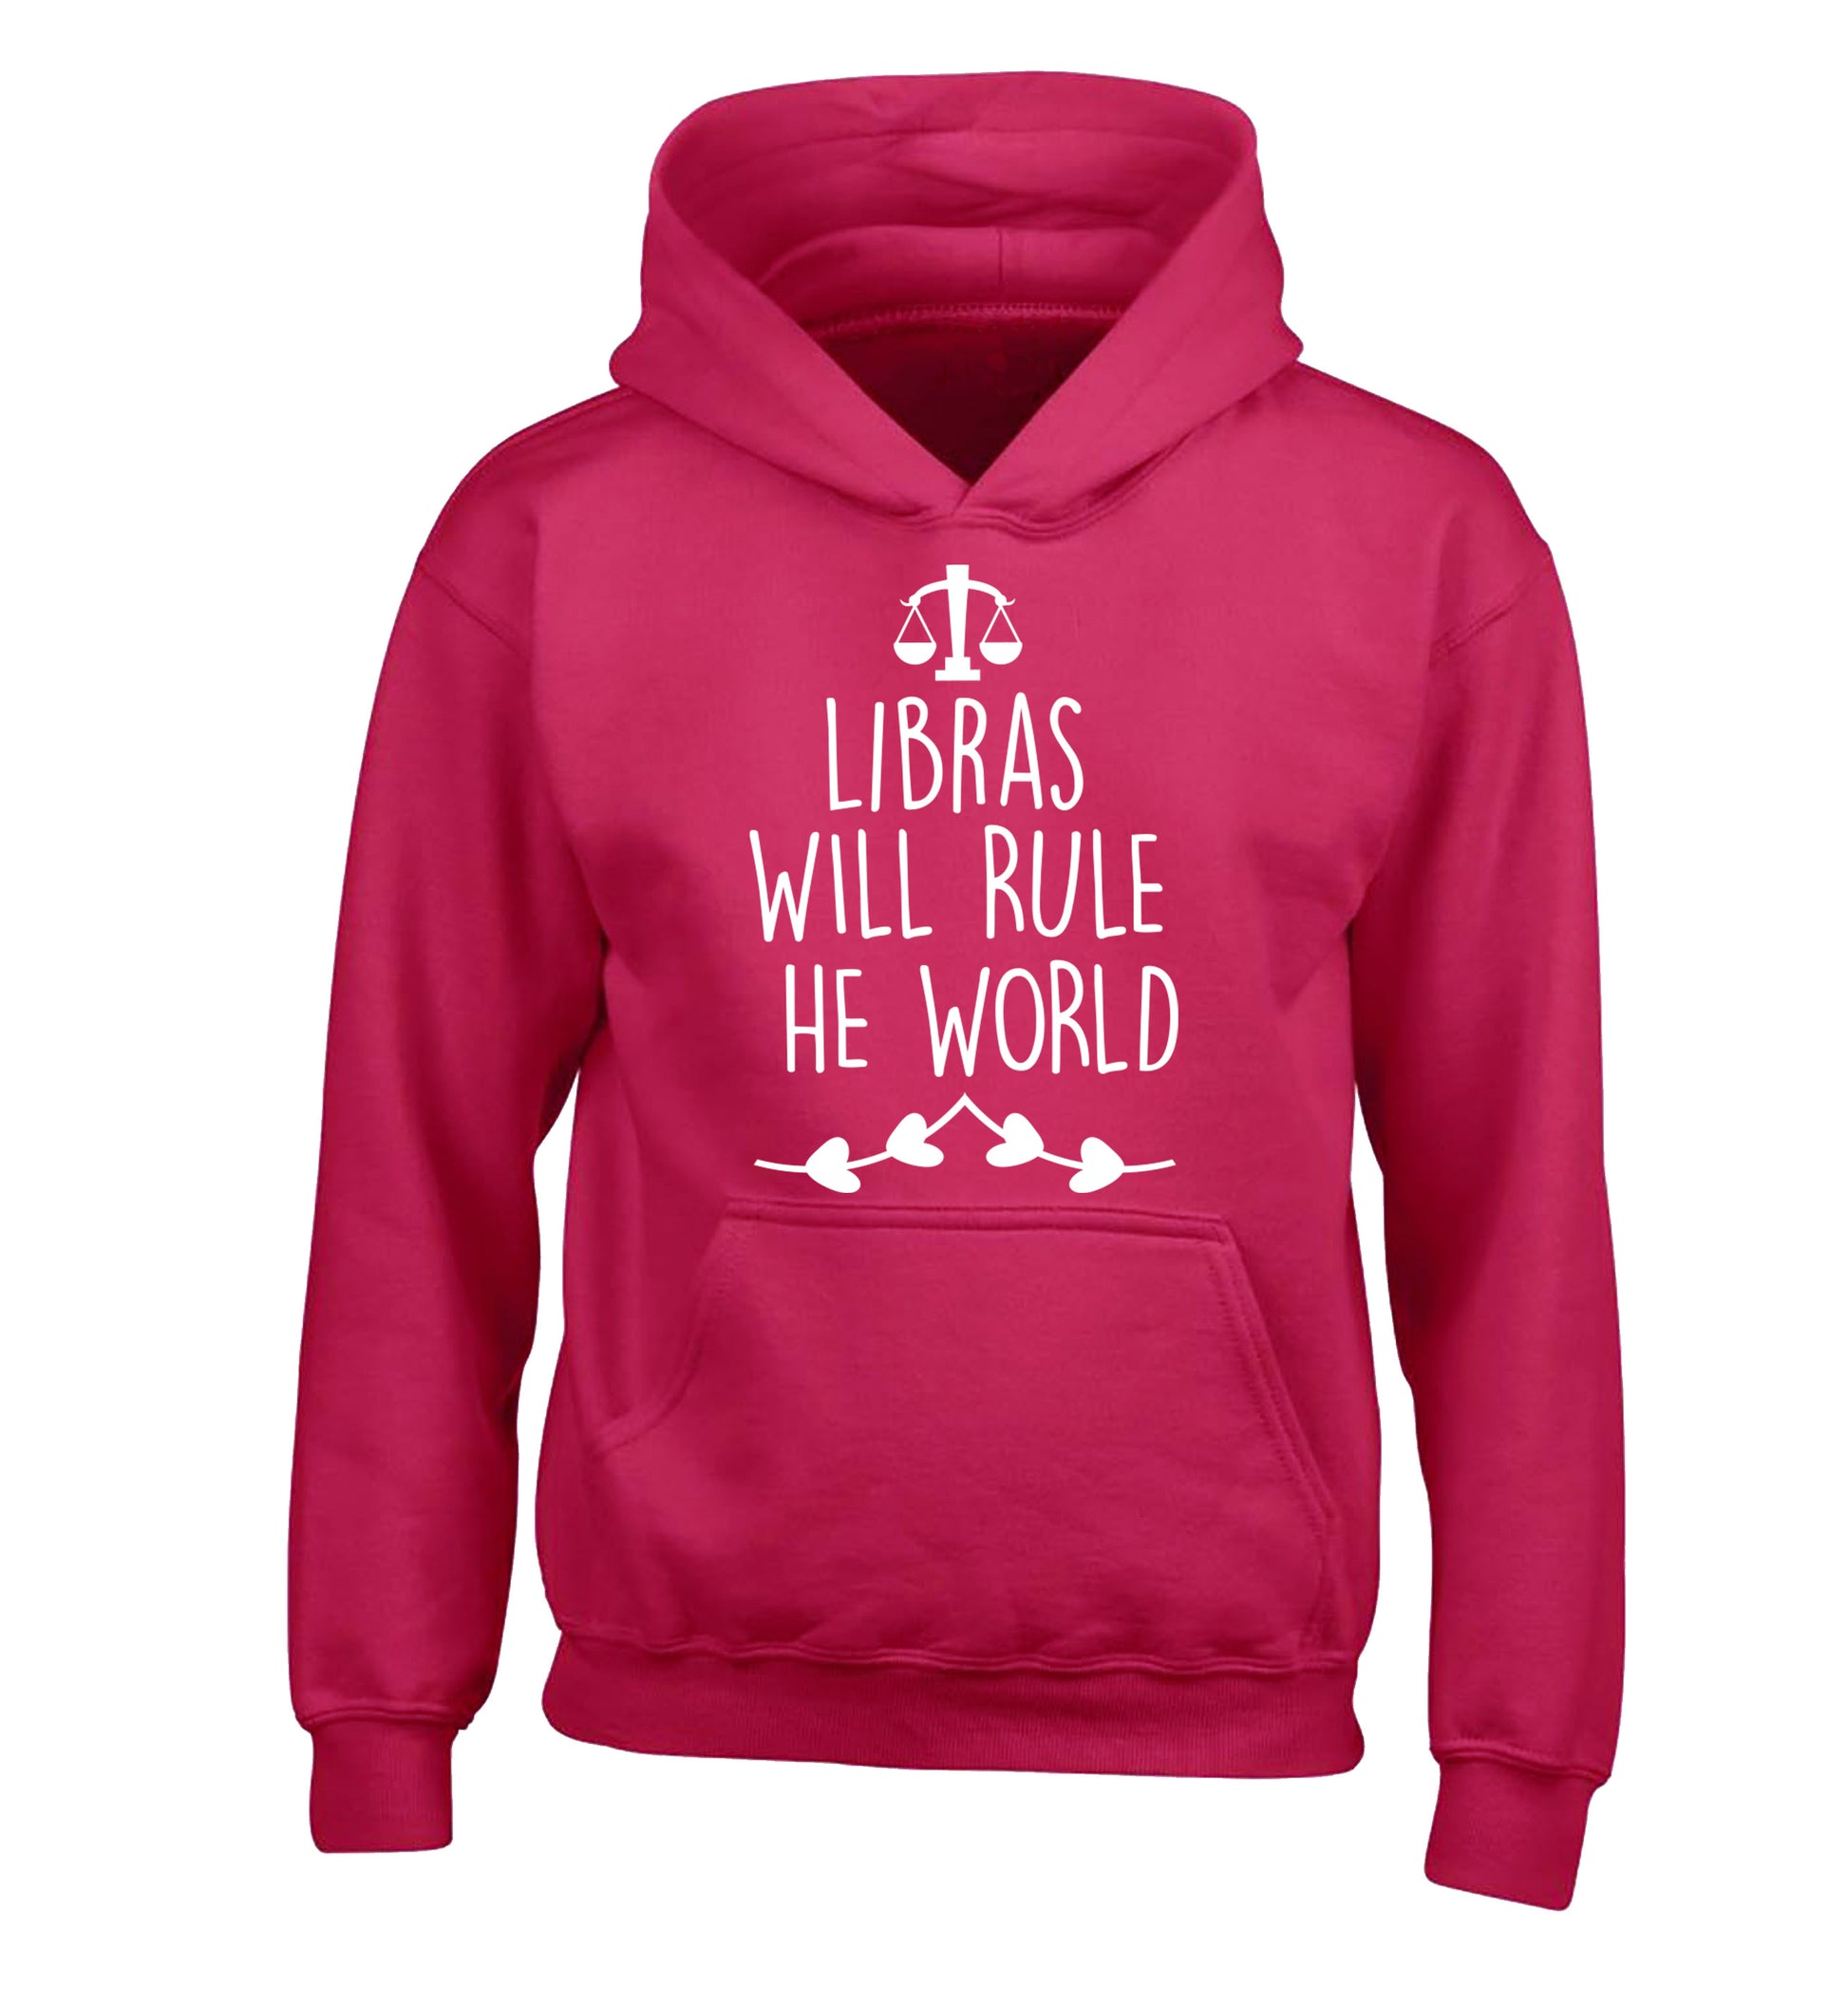 Libras will rule the world children's pink hoodie 12-13 Years